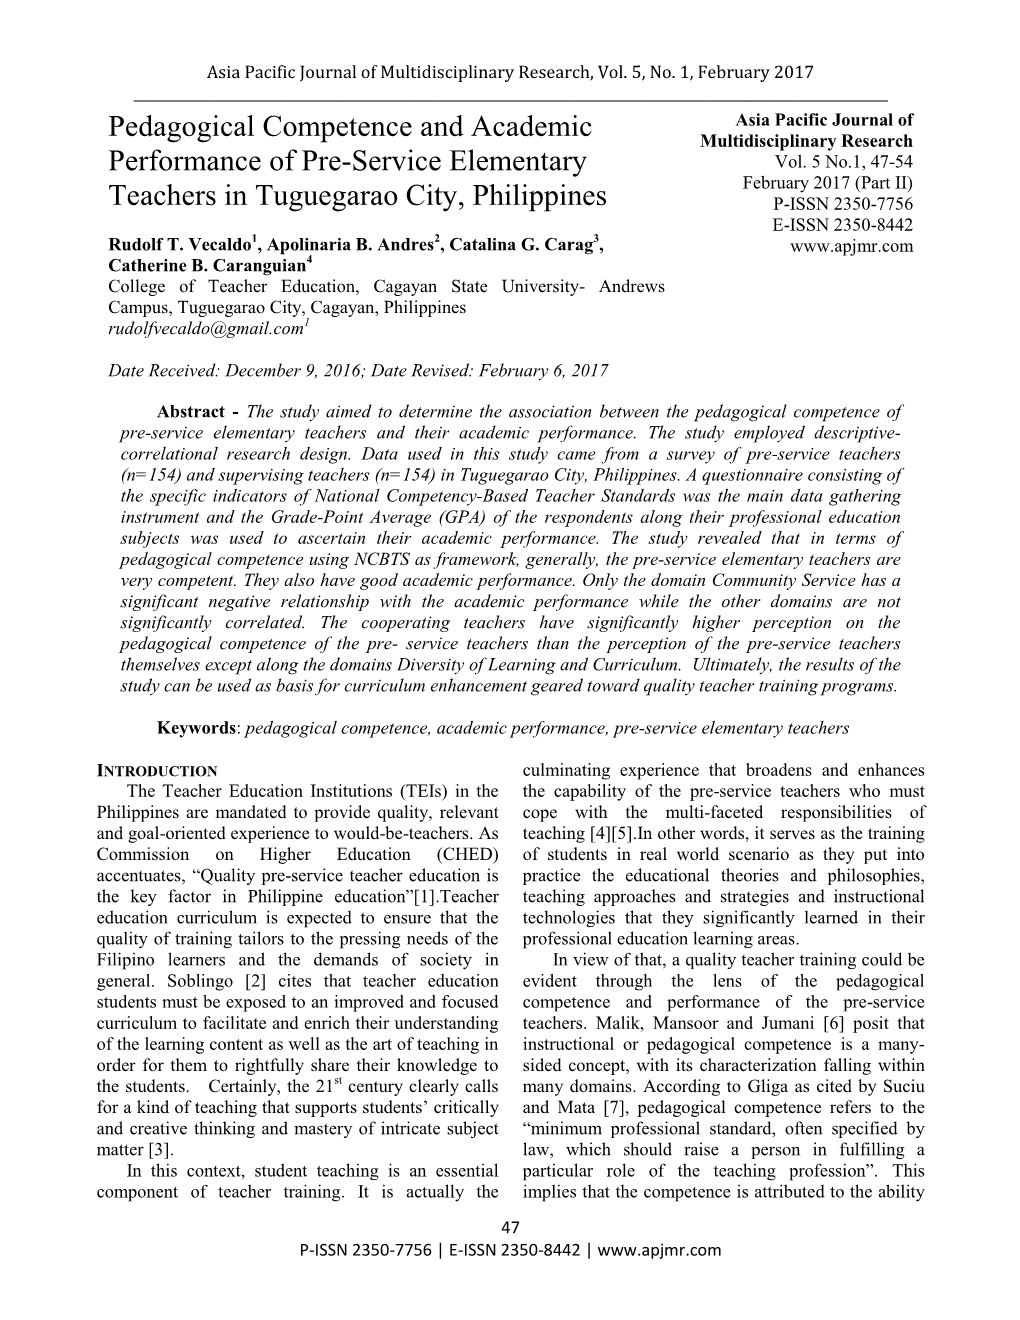 Pedagogical Competence and Academic Performance of Pre